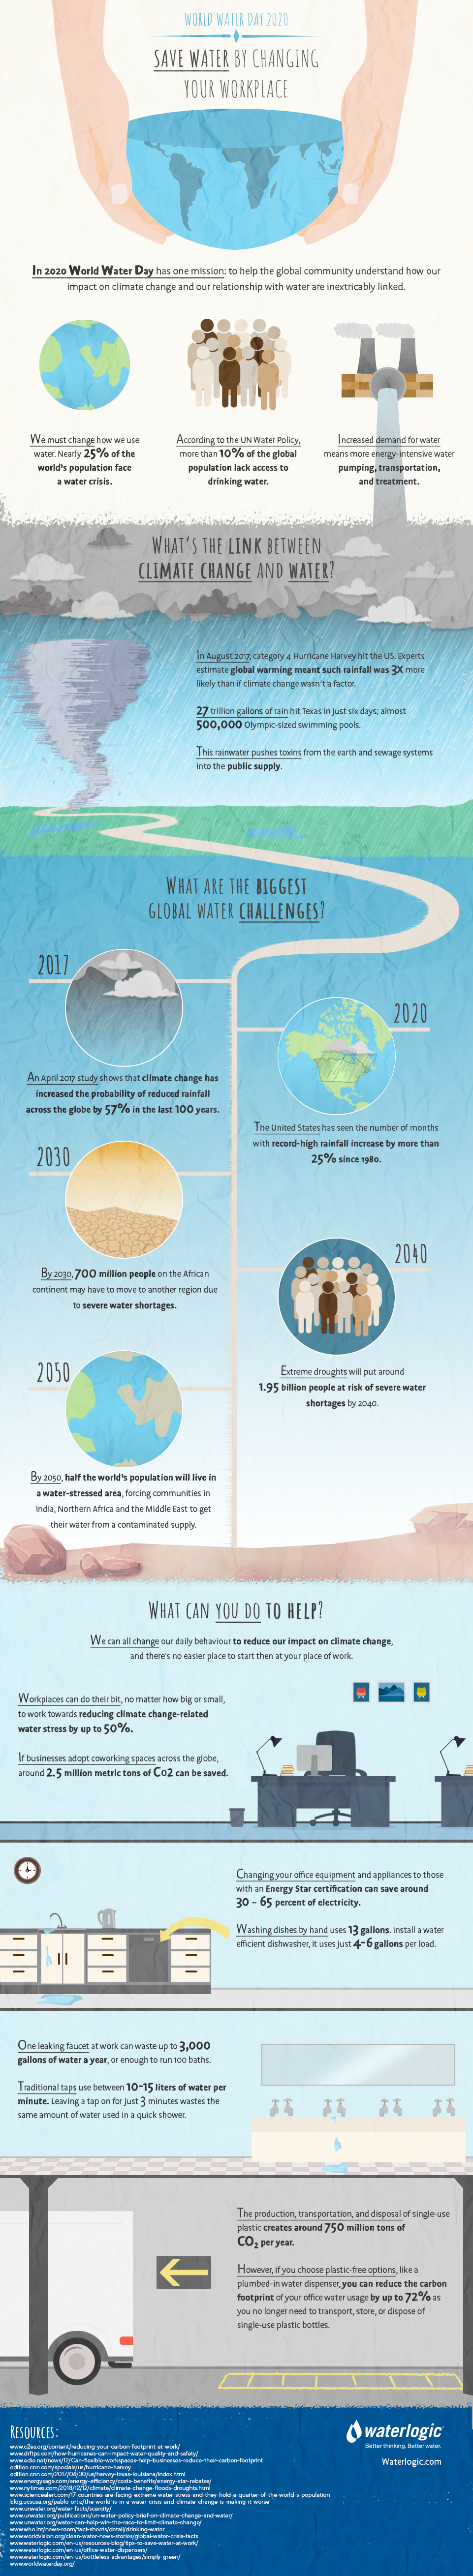 World Water Day 2020 infographic